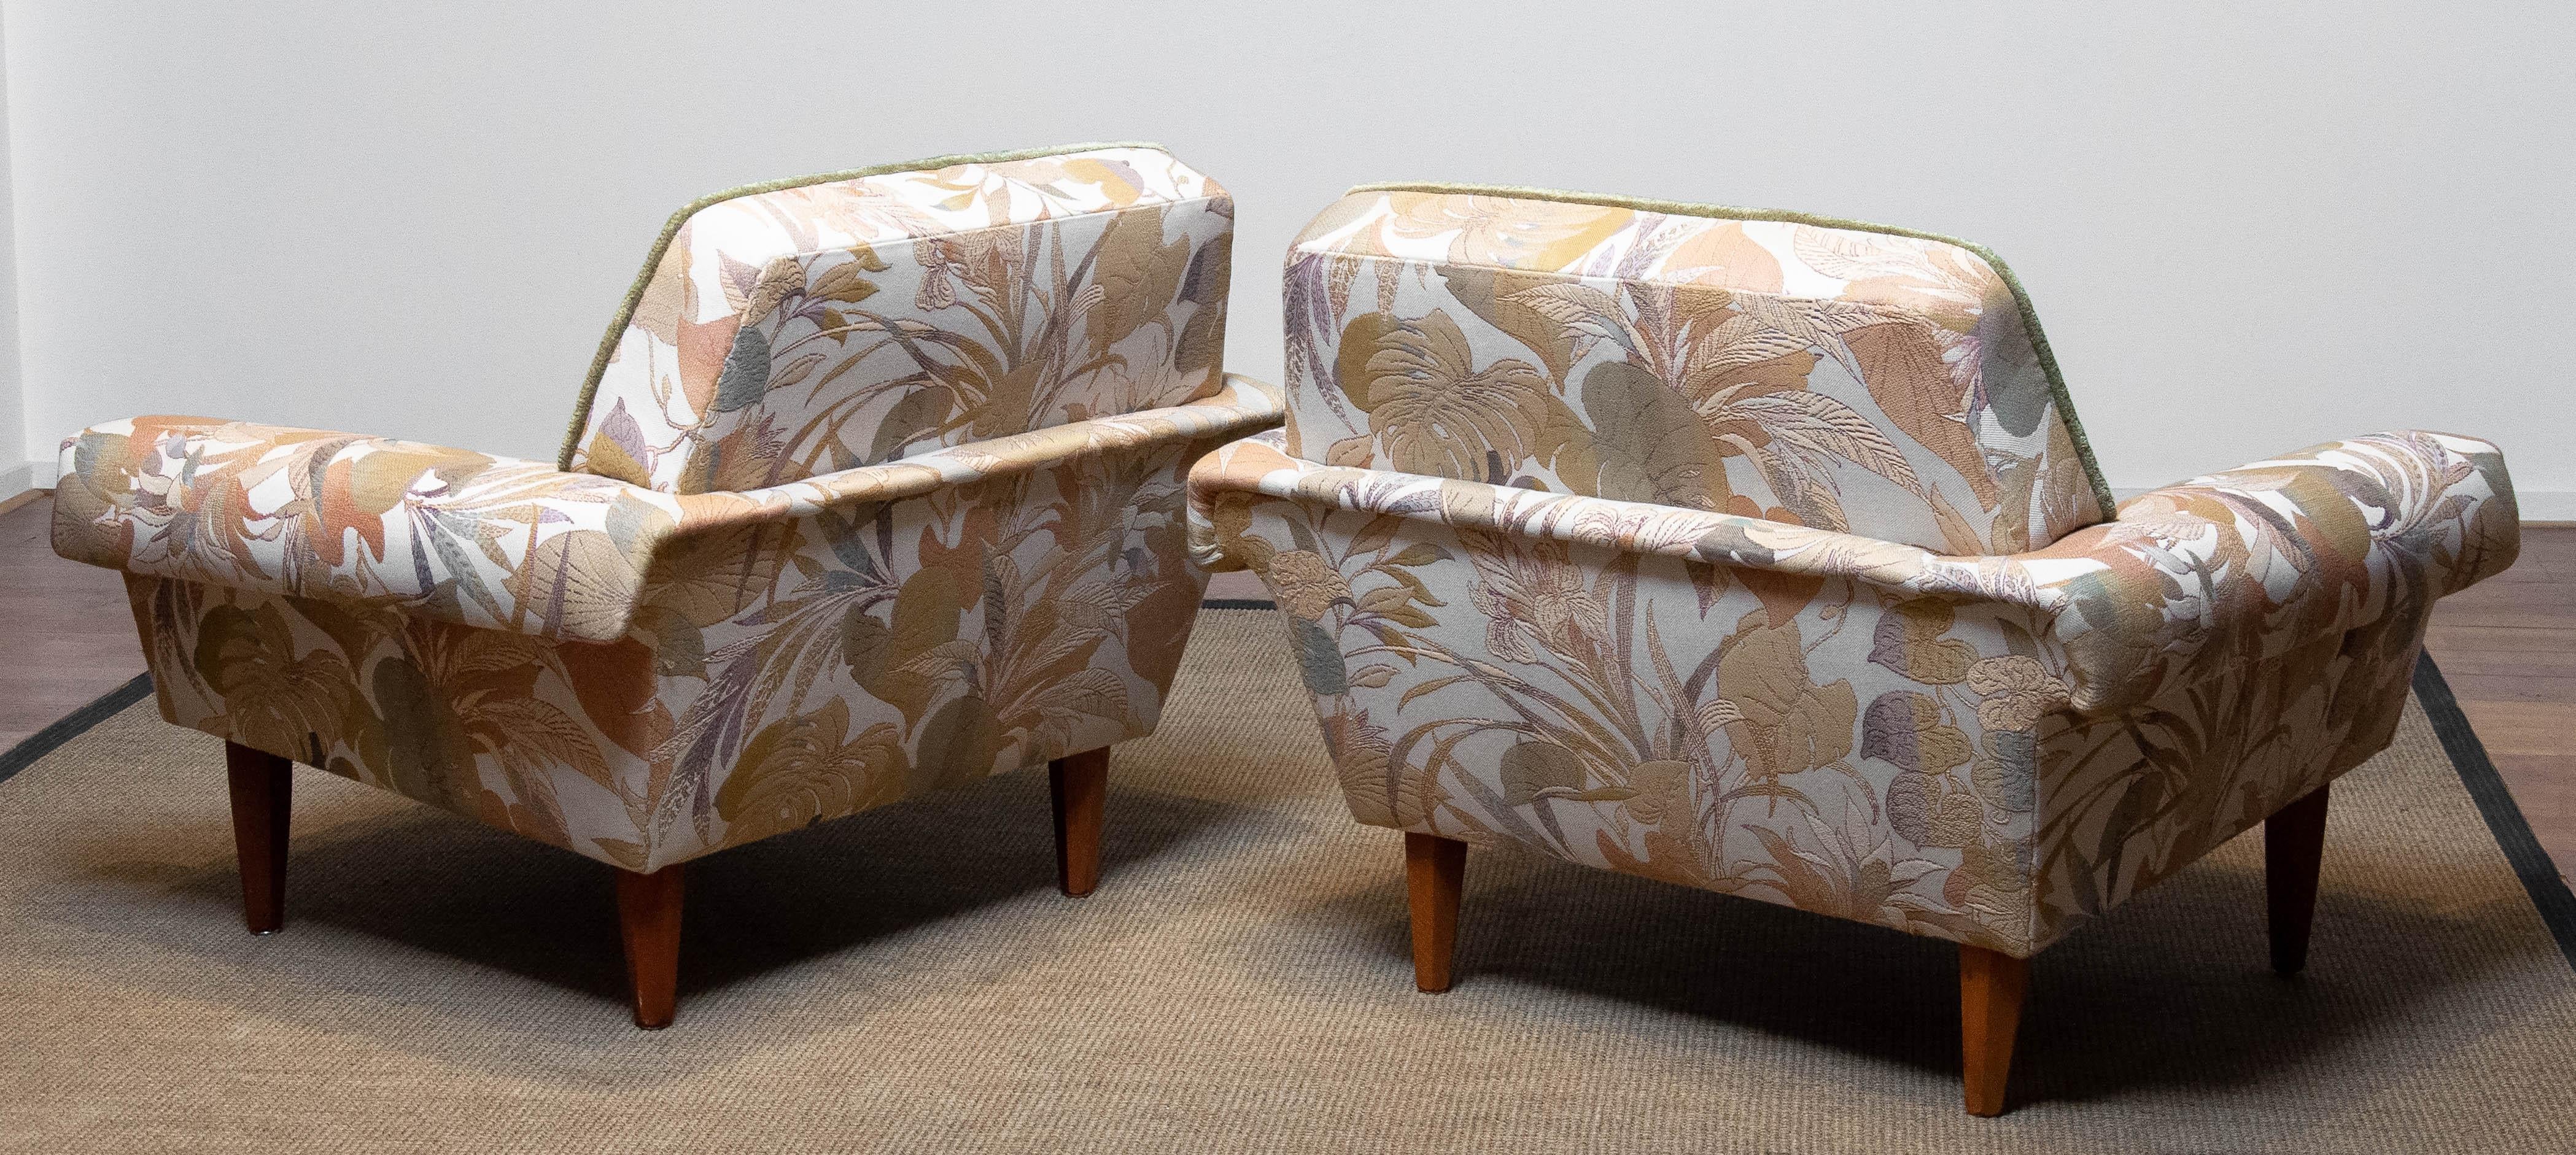 Pair Low Back Lounge Chairs Upholstered Floral Jacquard Fabric From Denmark 1970 For Sale 5